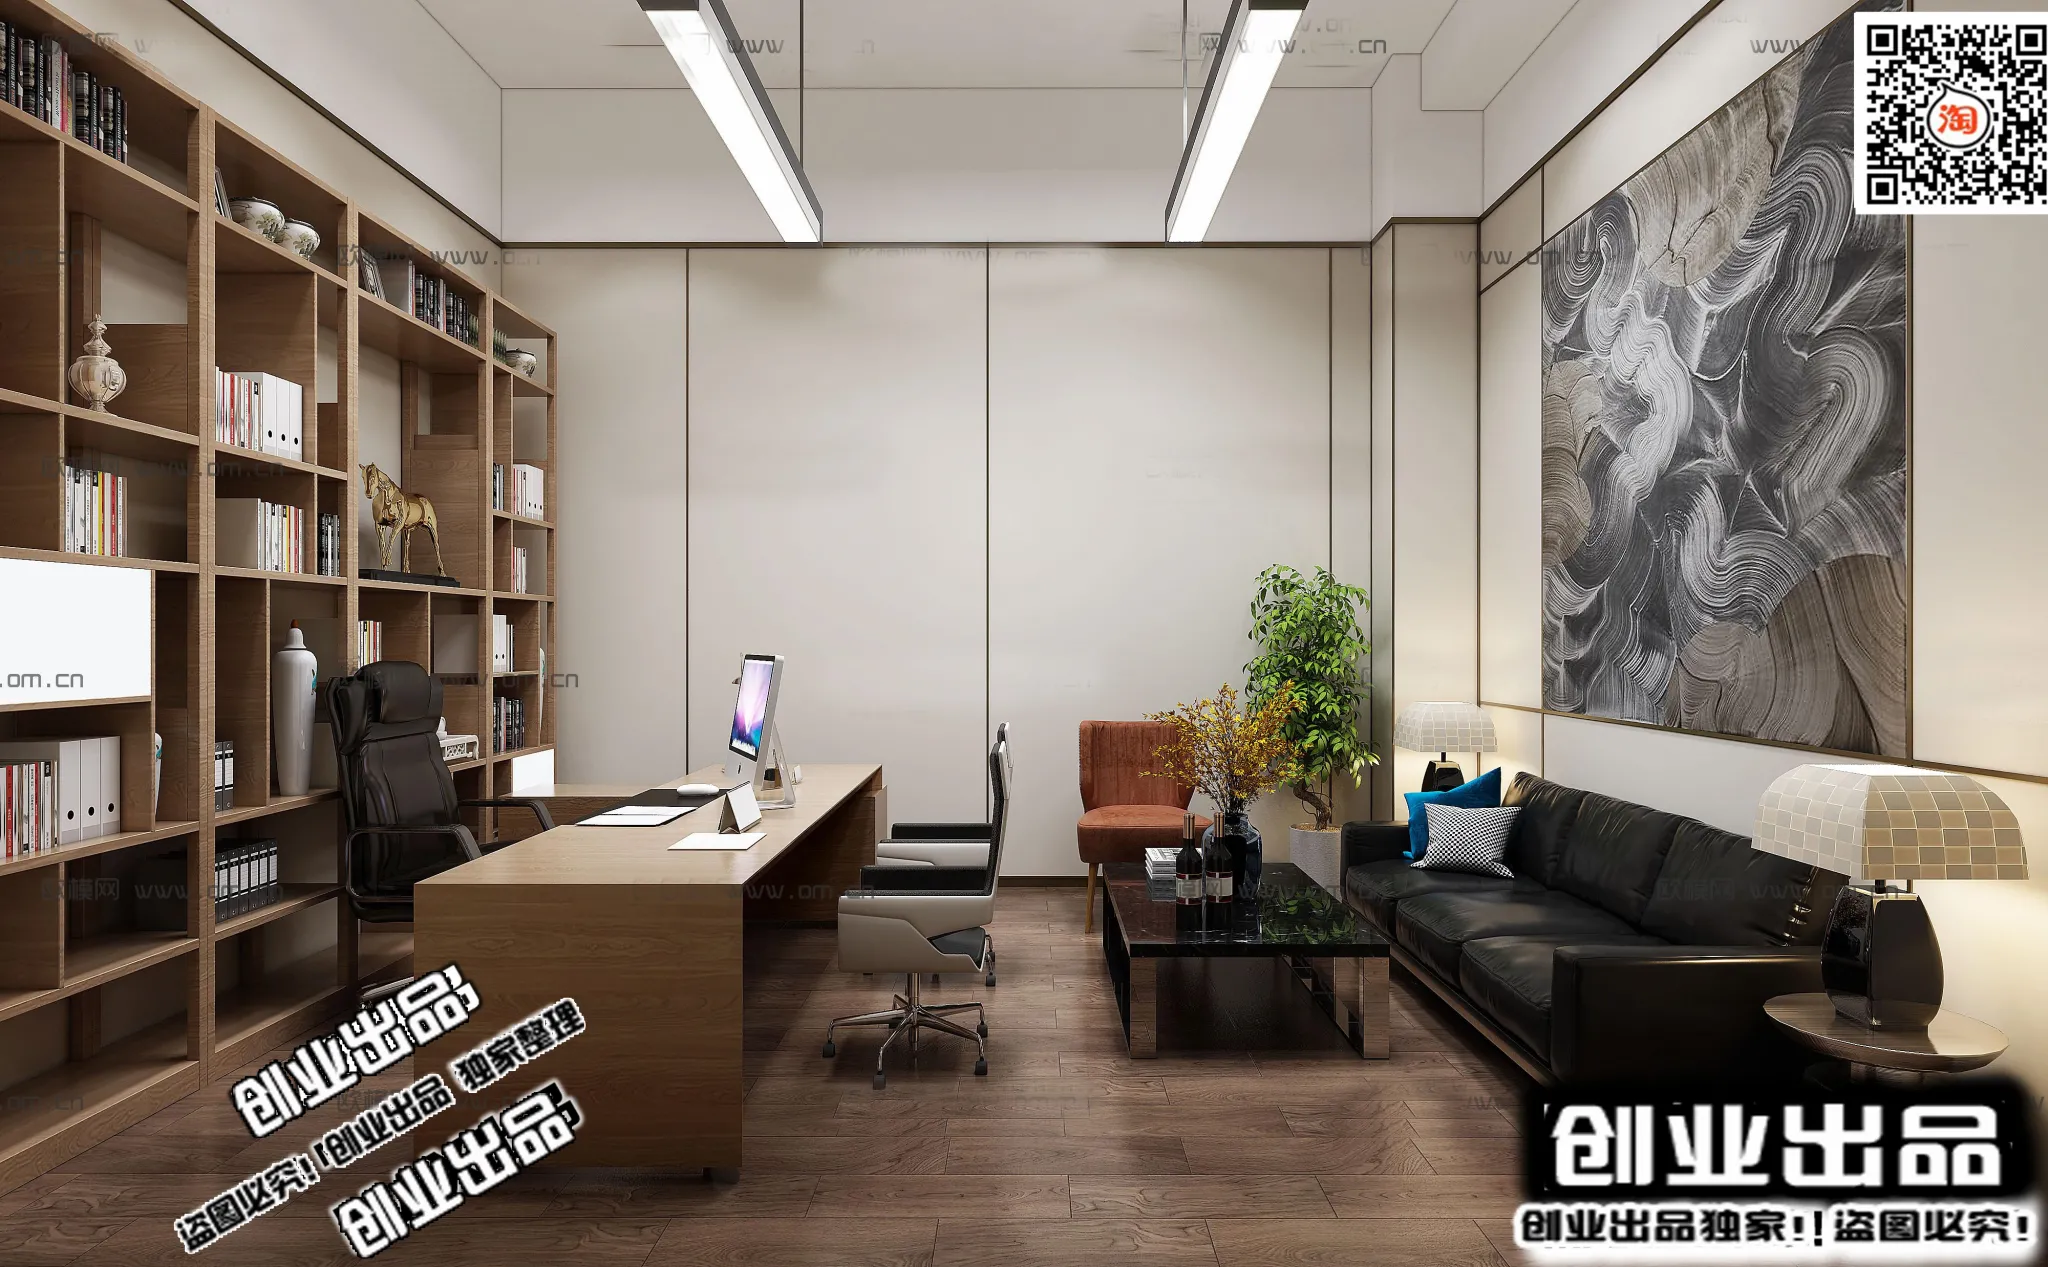 3D OFFICE INTERIOR (VRAY) – MANAGER ROOM 3D SCENES – 119